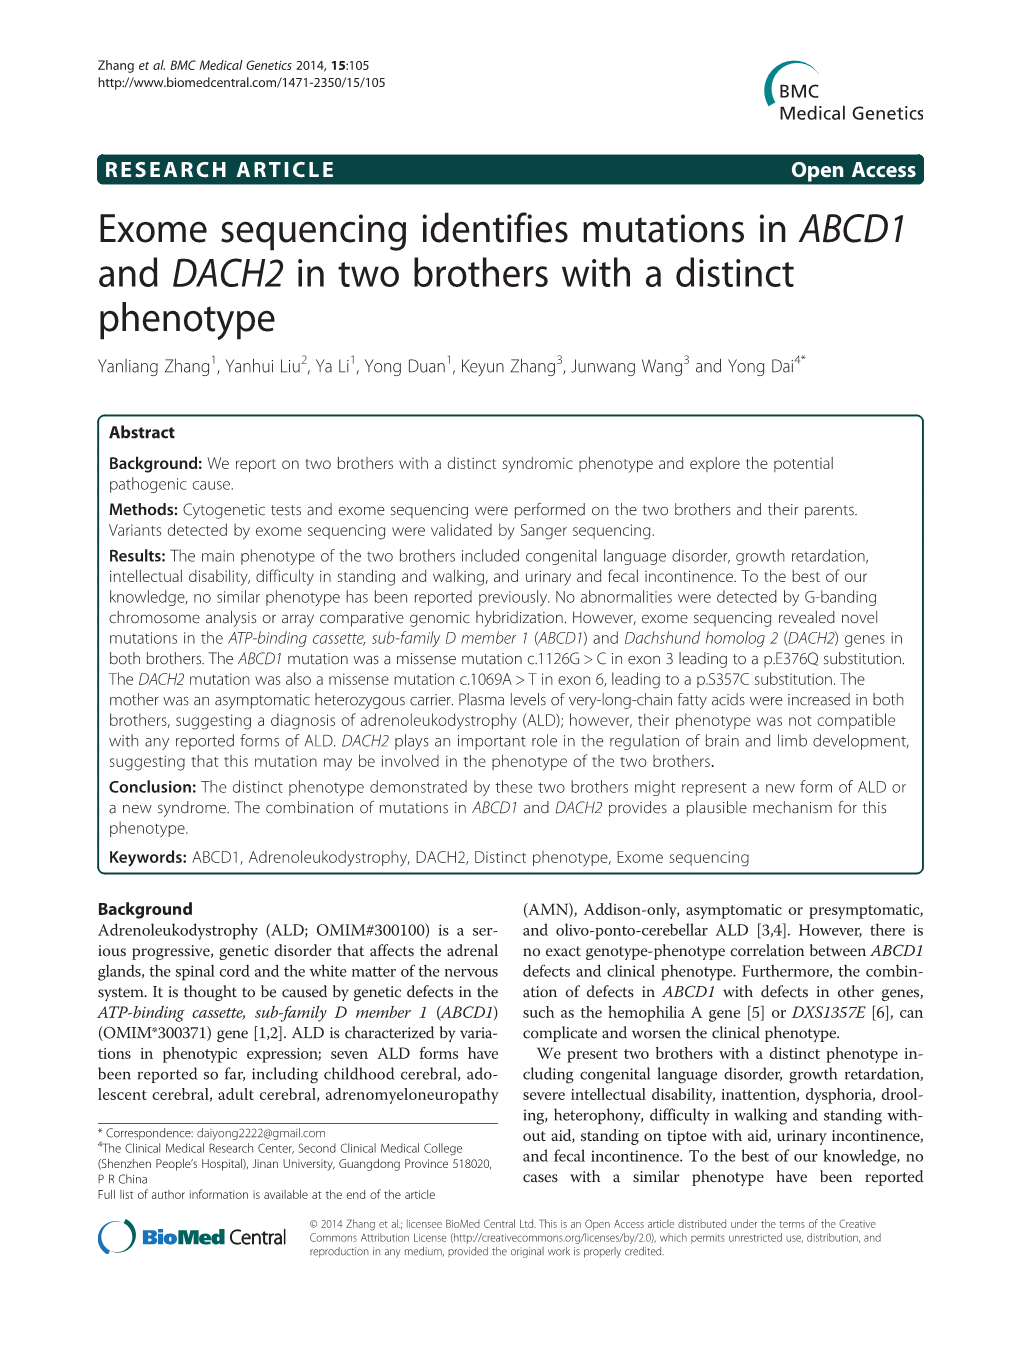 Exome Sequencing Identifies Mutations in ABCD1 and DACH2 In